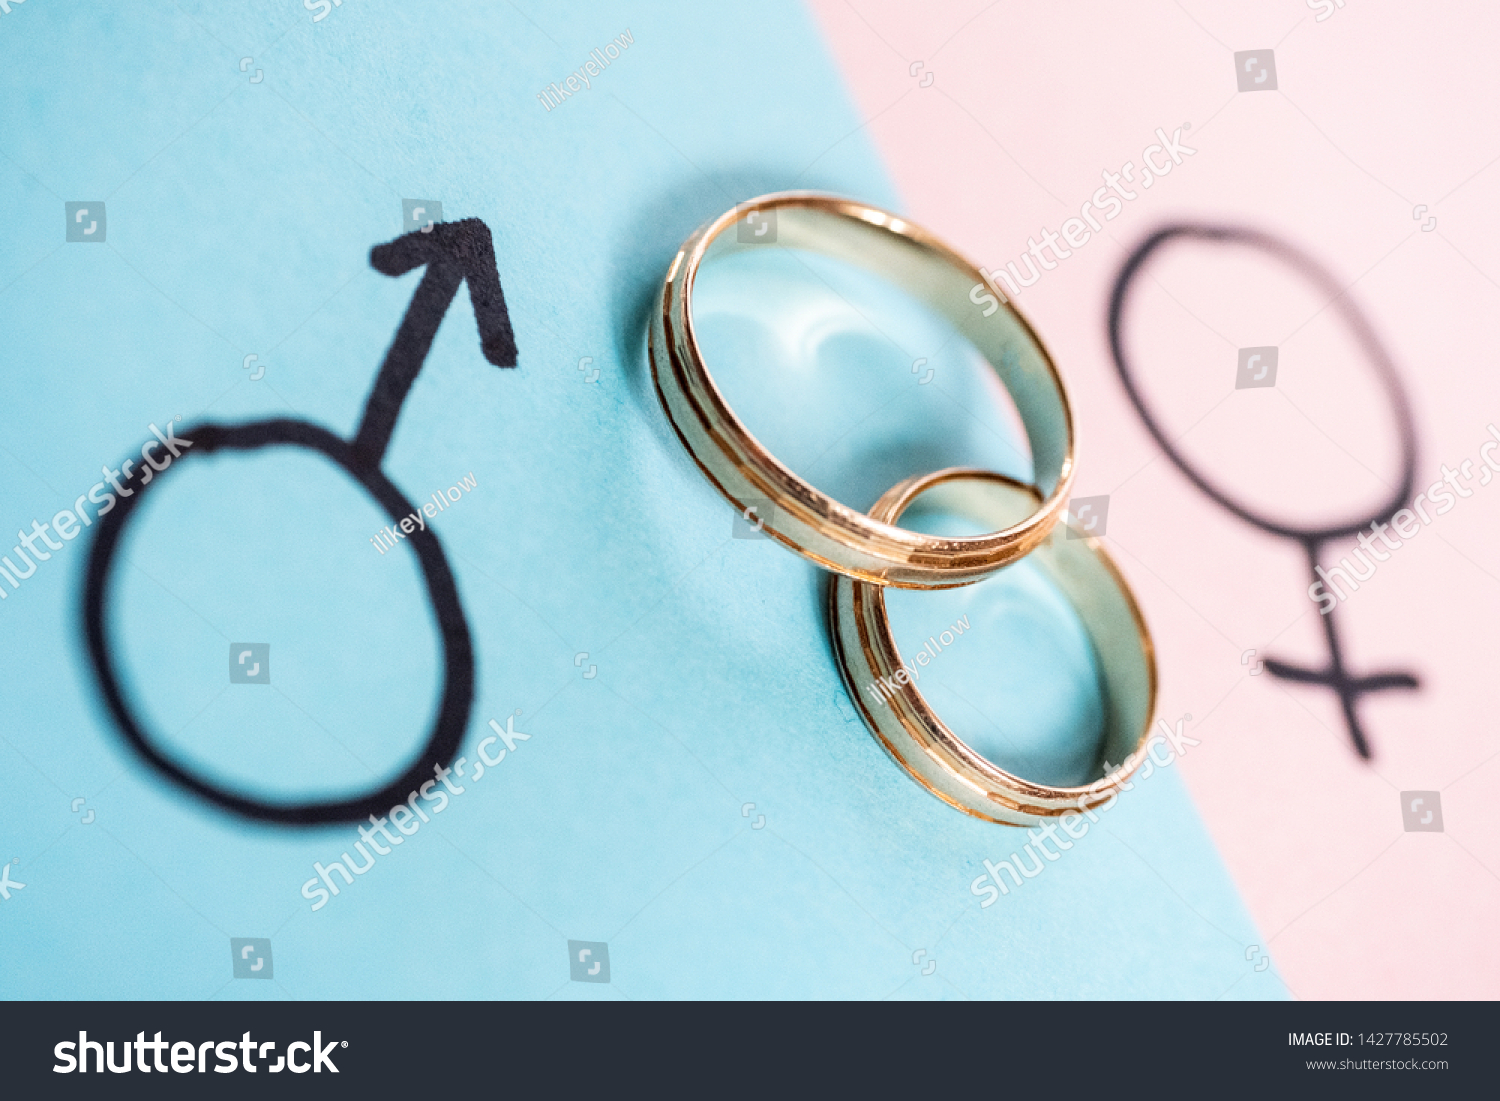 Gender symbols Venus and Mars indicate man and woman on blue and pink paper with two wedding rings. Heterosexual marriage. #1427785502